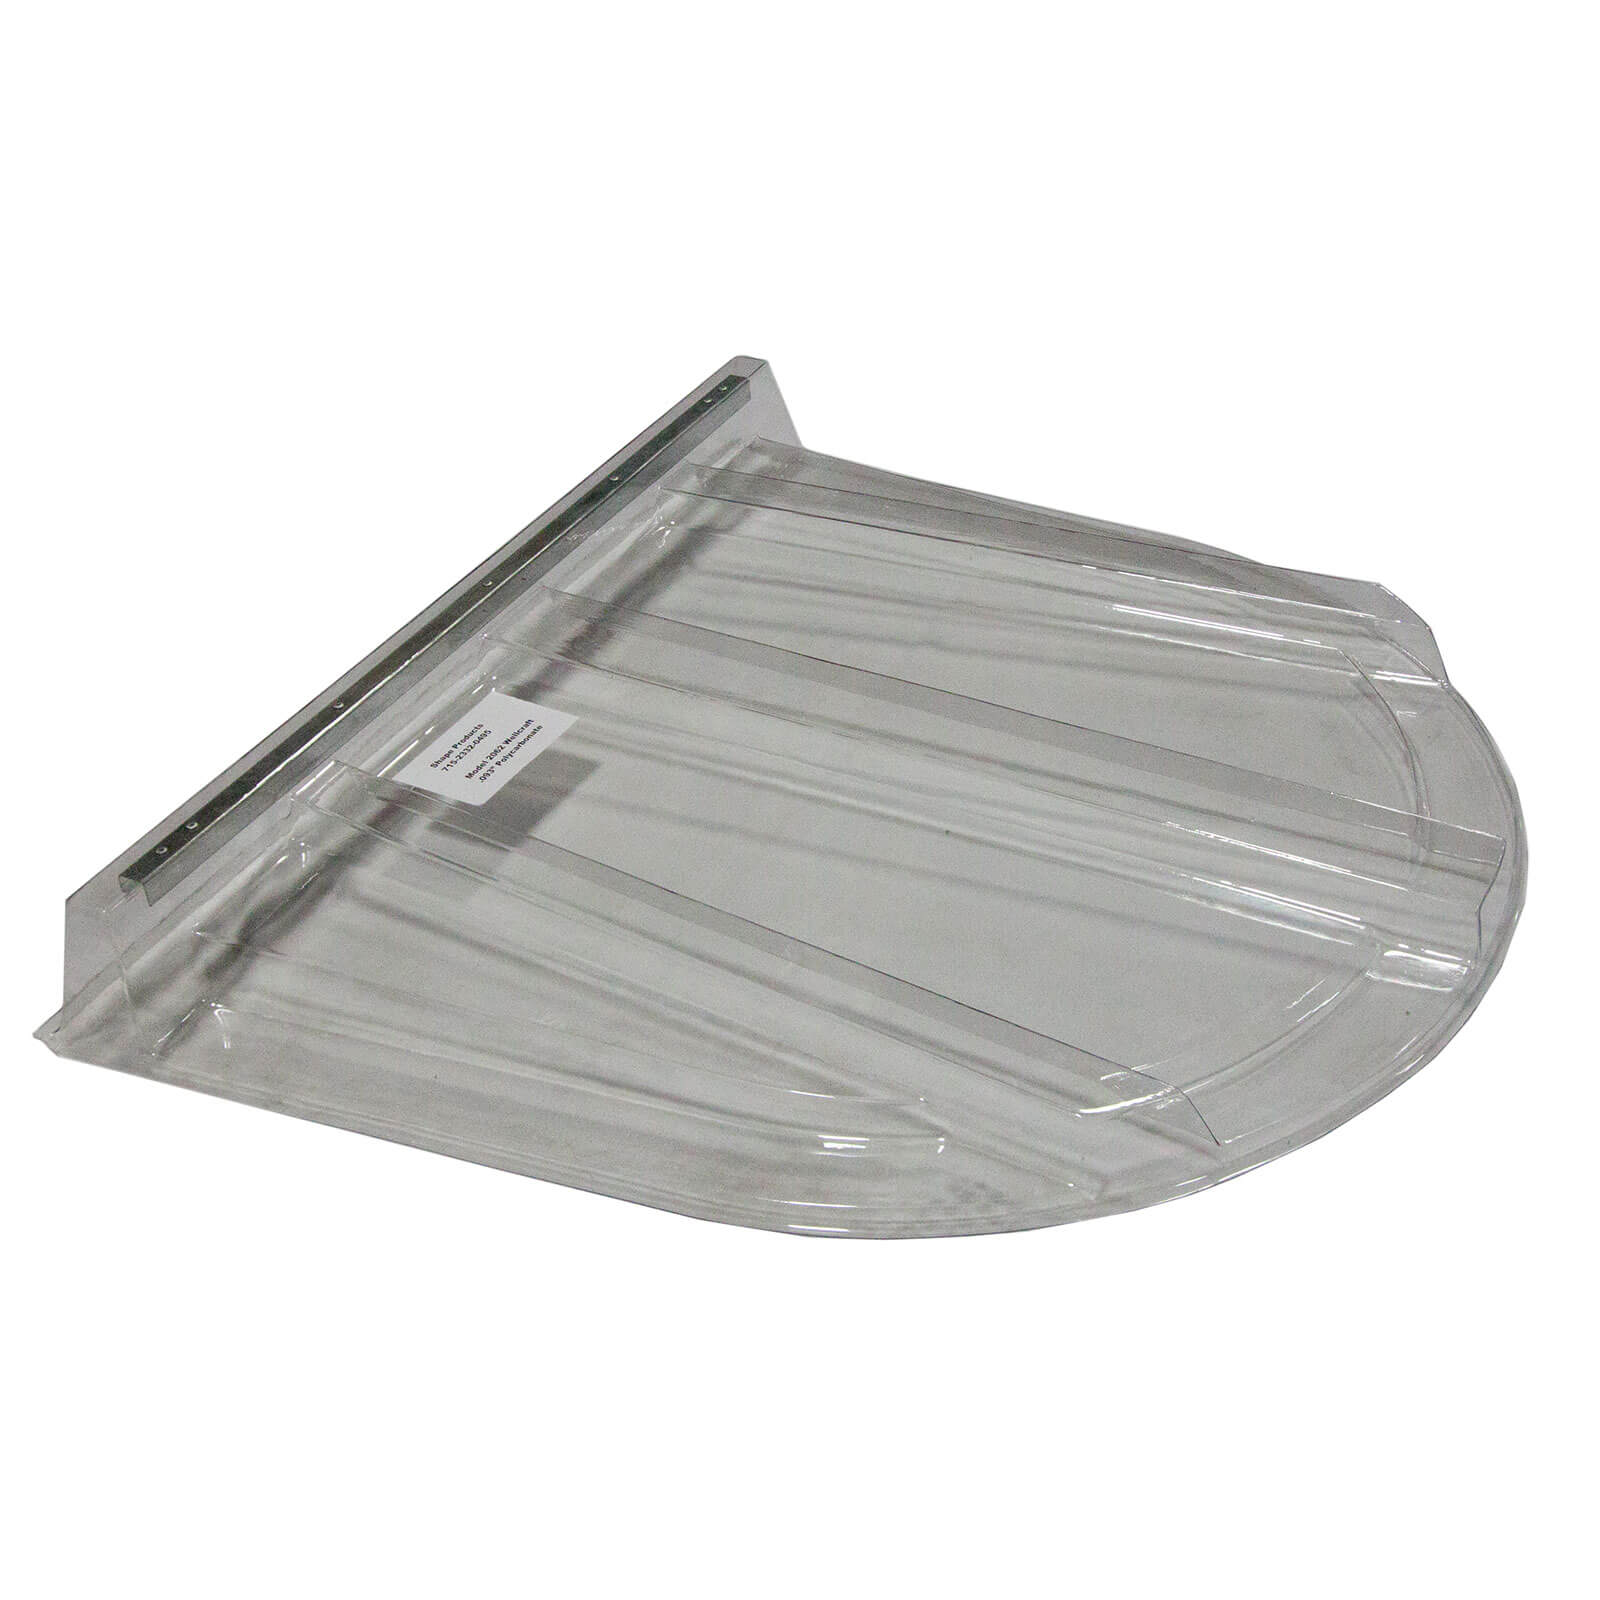 Modern Builders Supply - Wellcraft 2062 Polycarbonate Cover